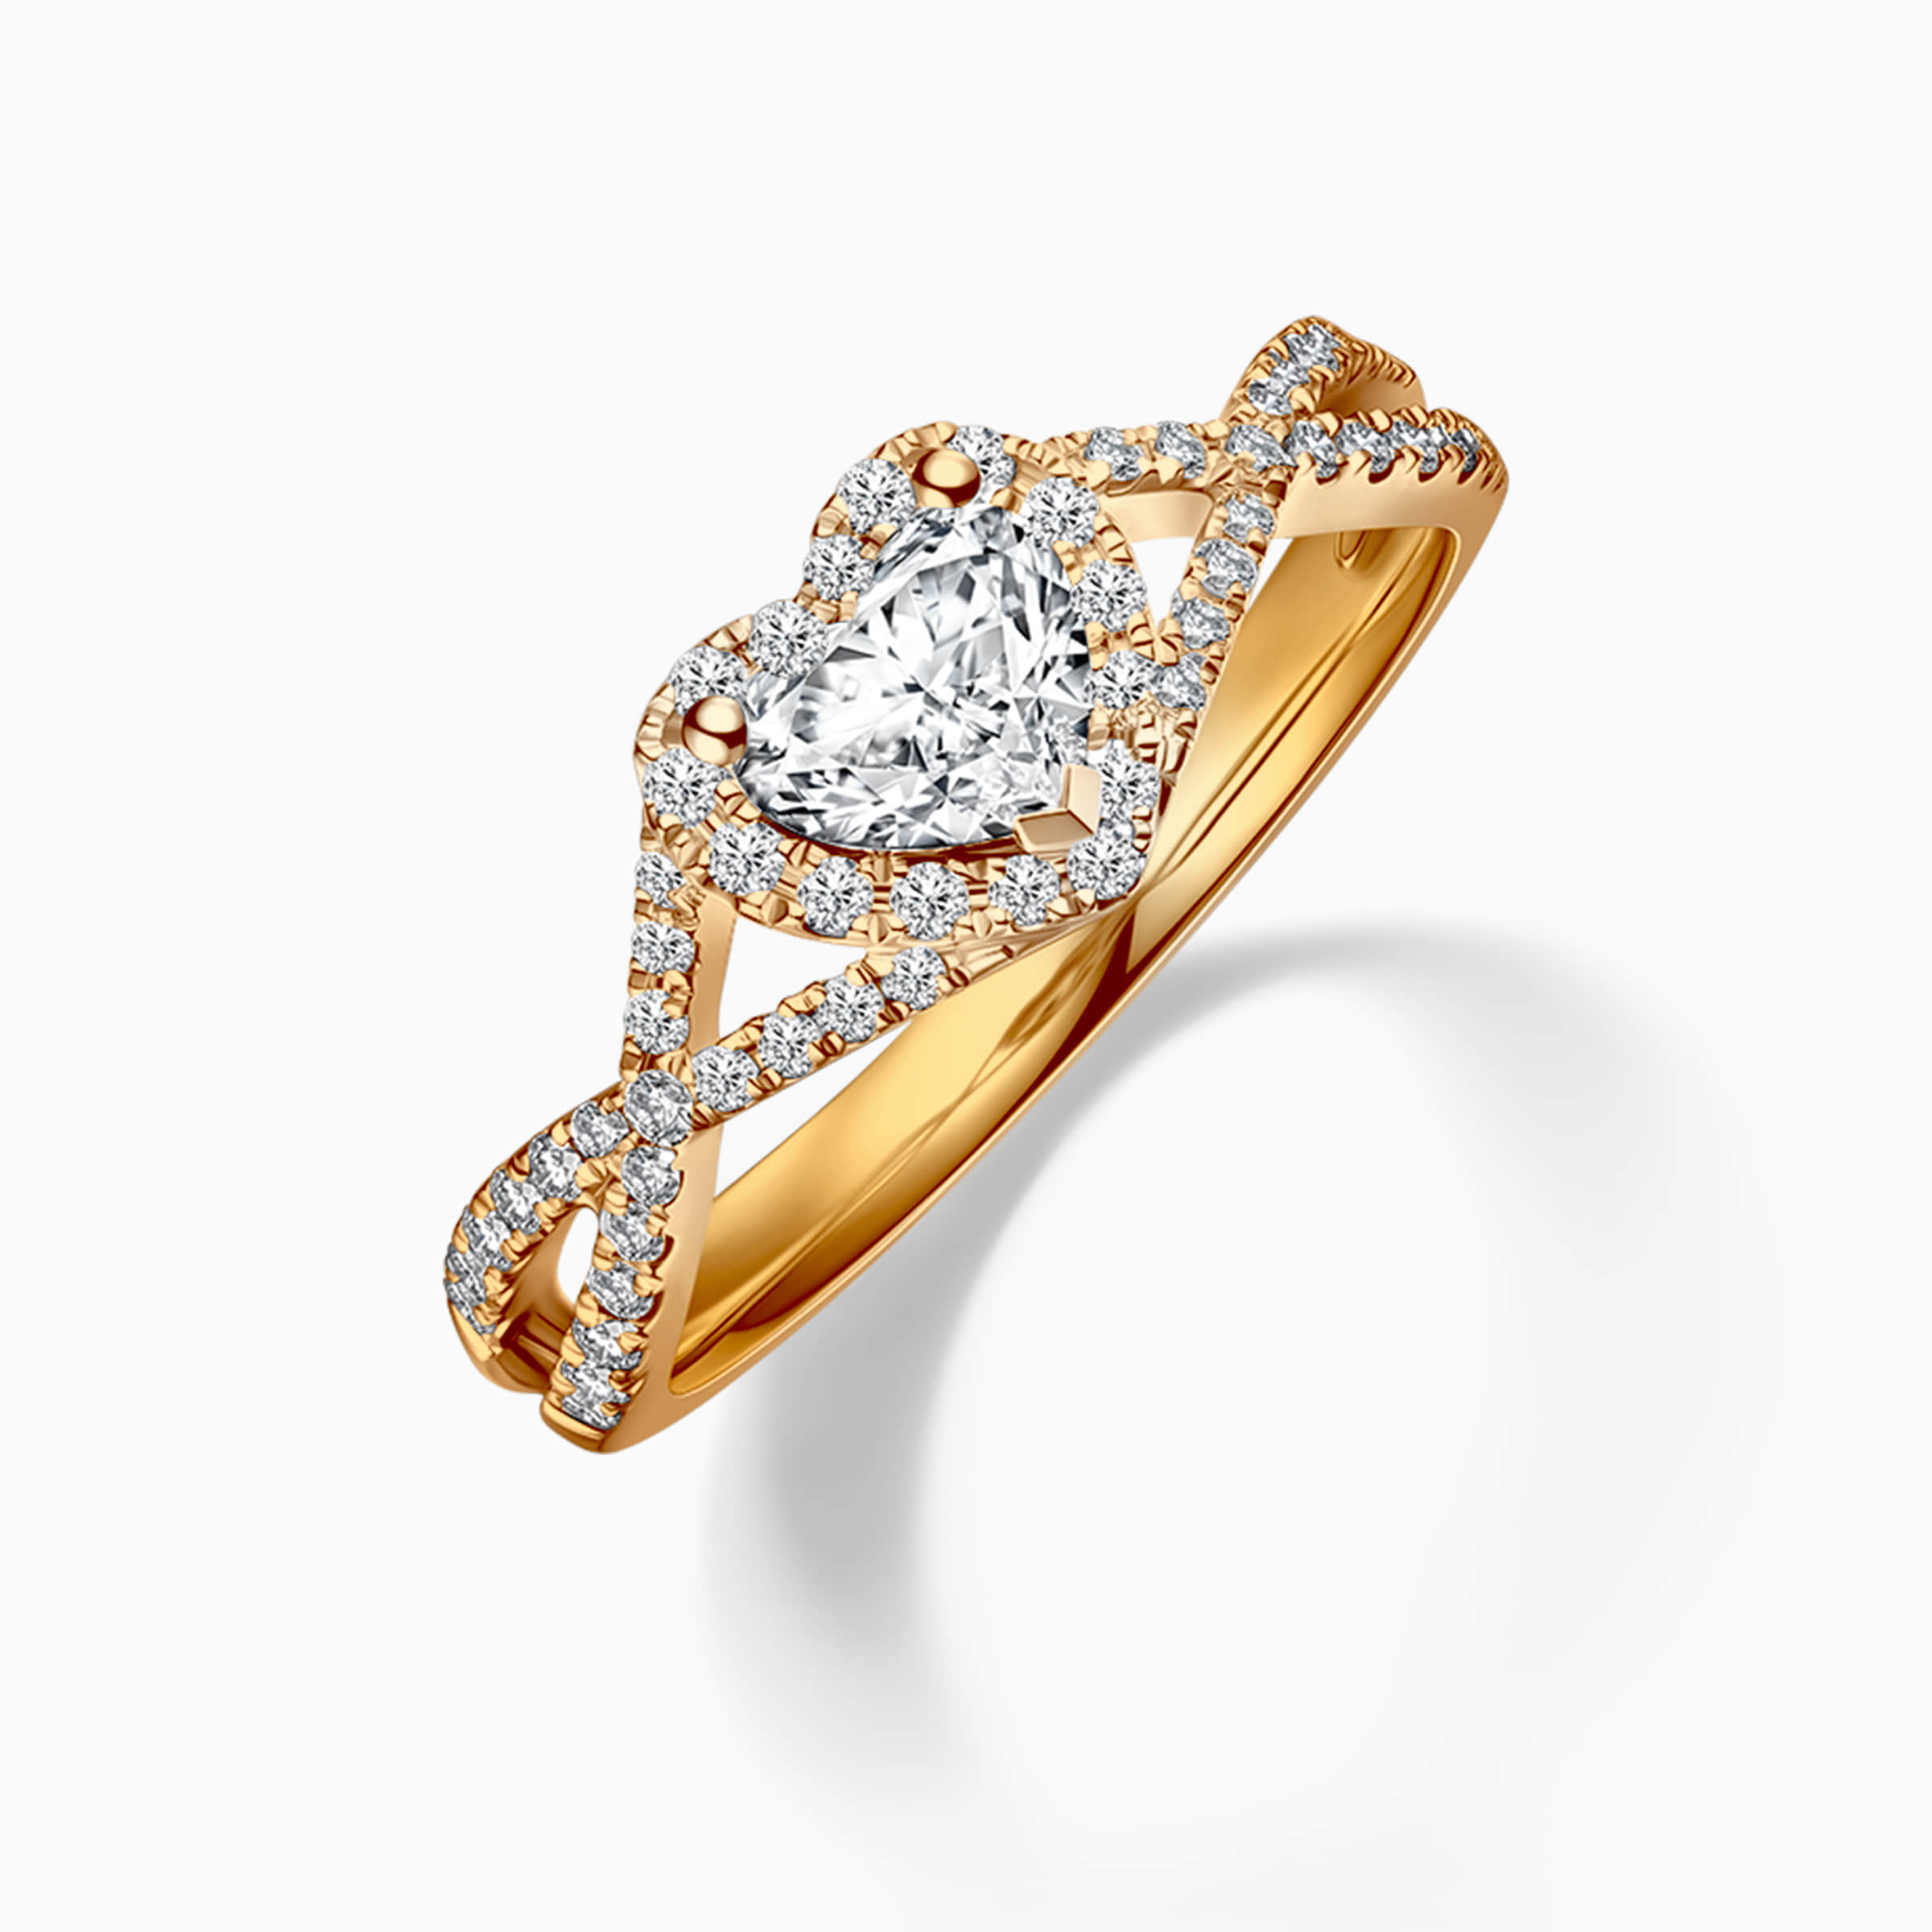 Darry Ring heart halo split shank engagement ring in yellow gold